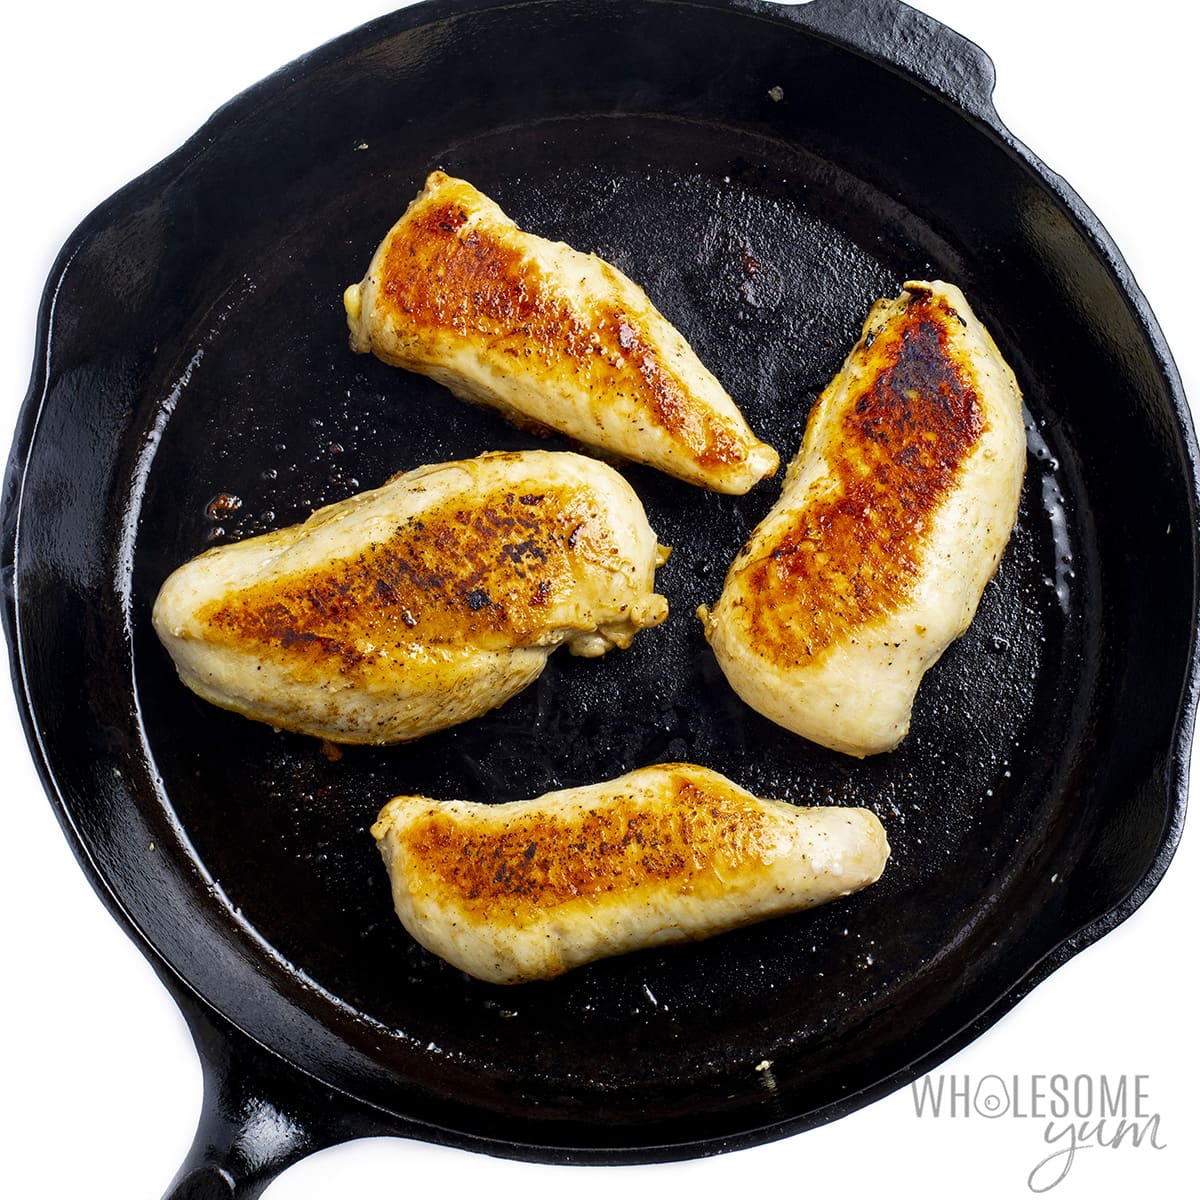 Pan seared chicken breasts in a cast iron skillet.